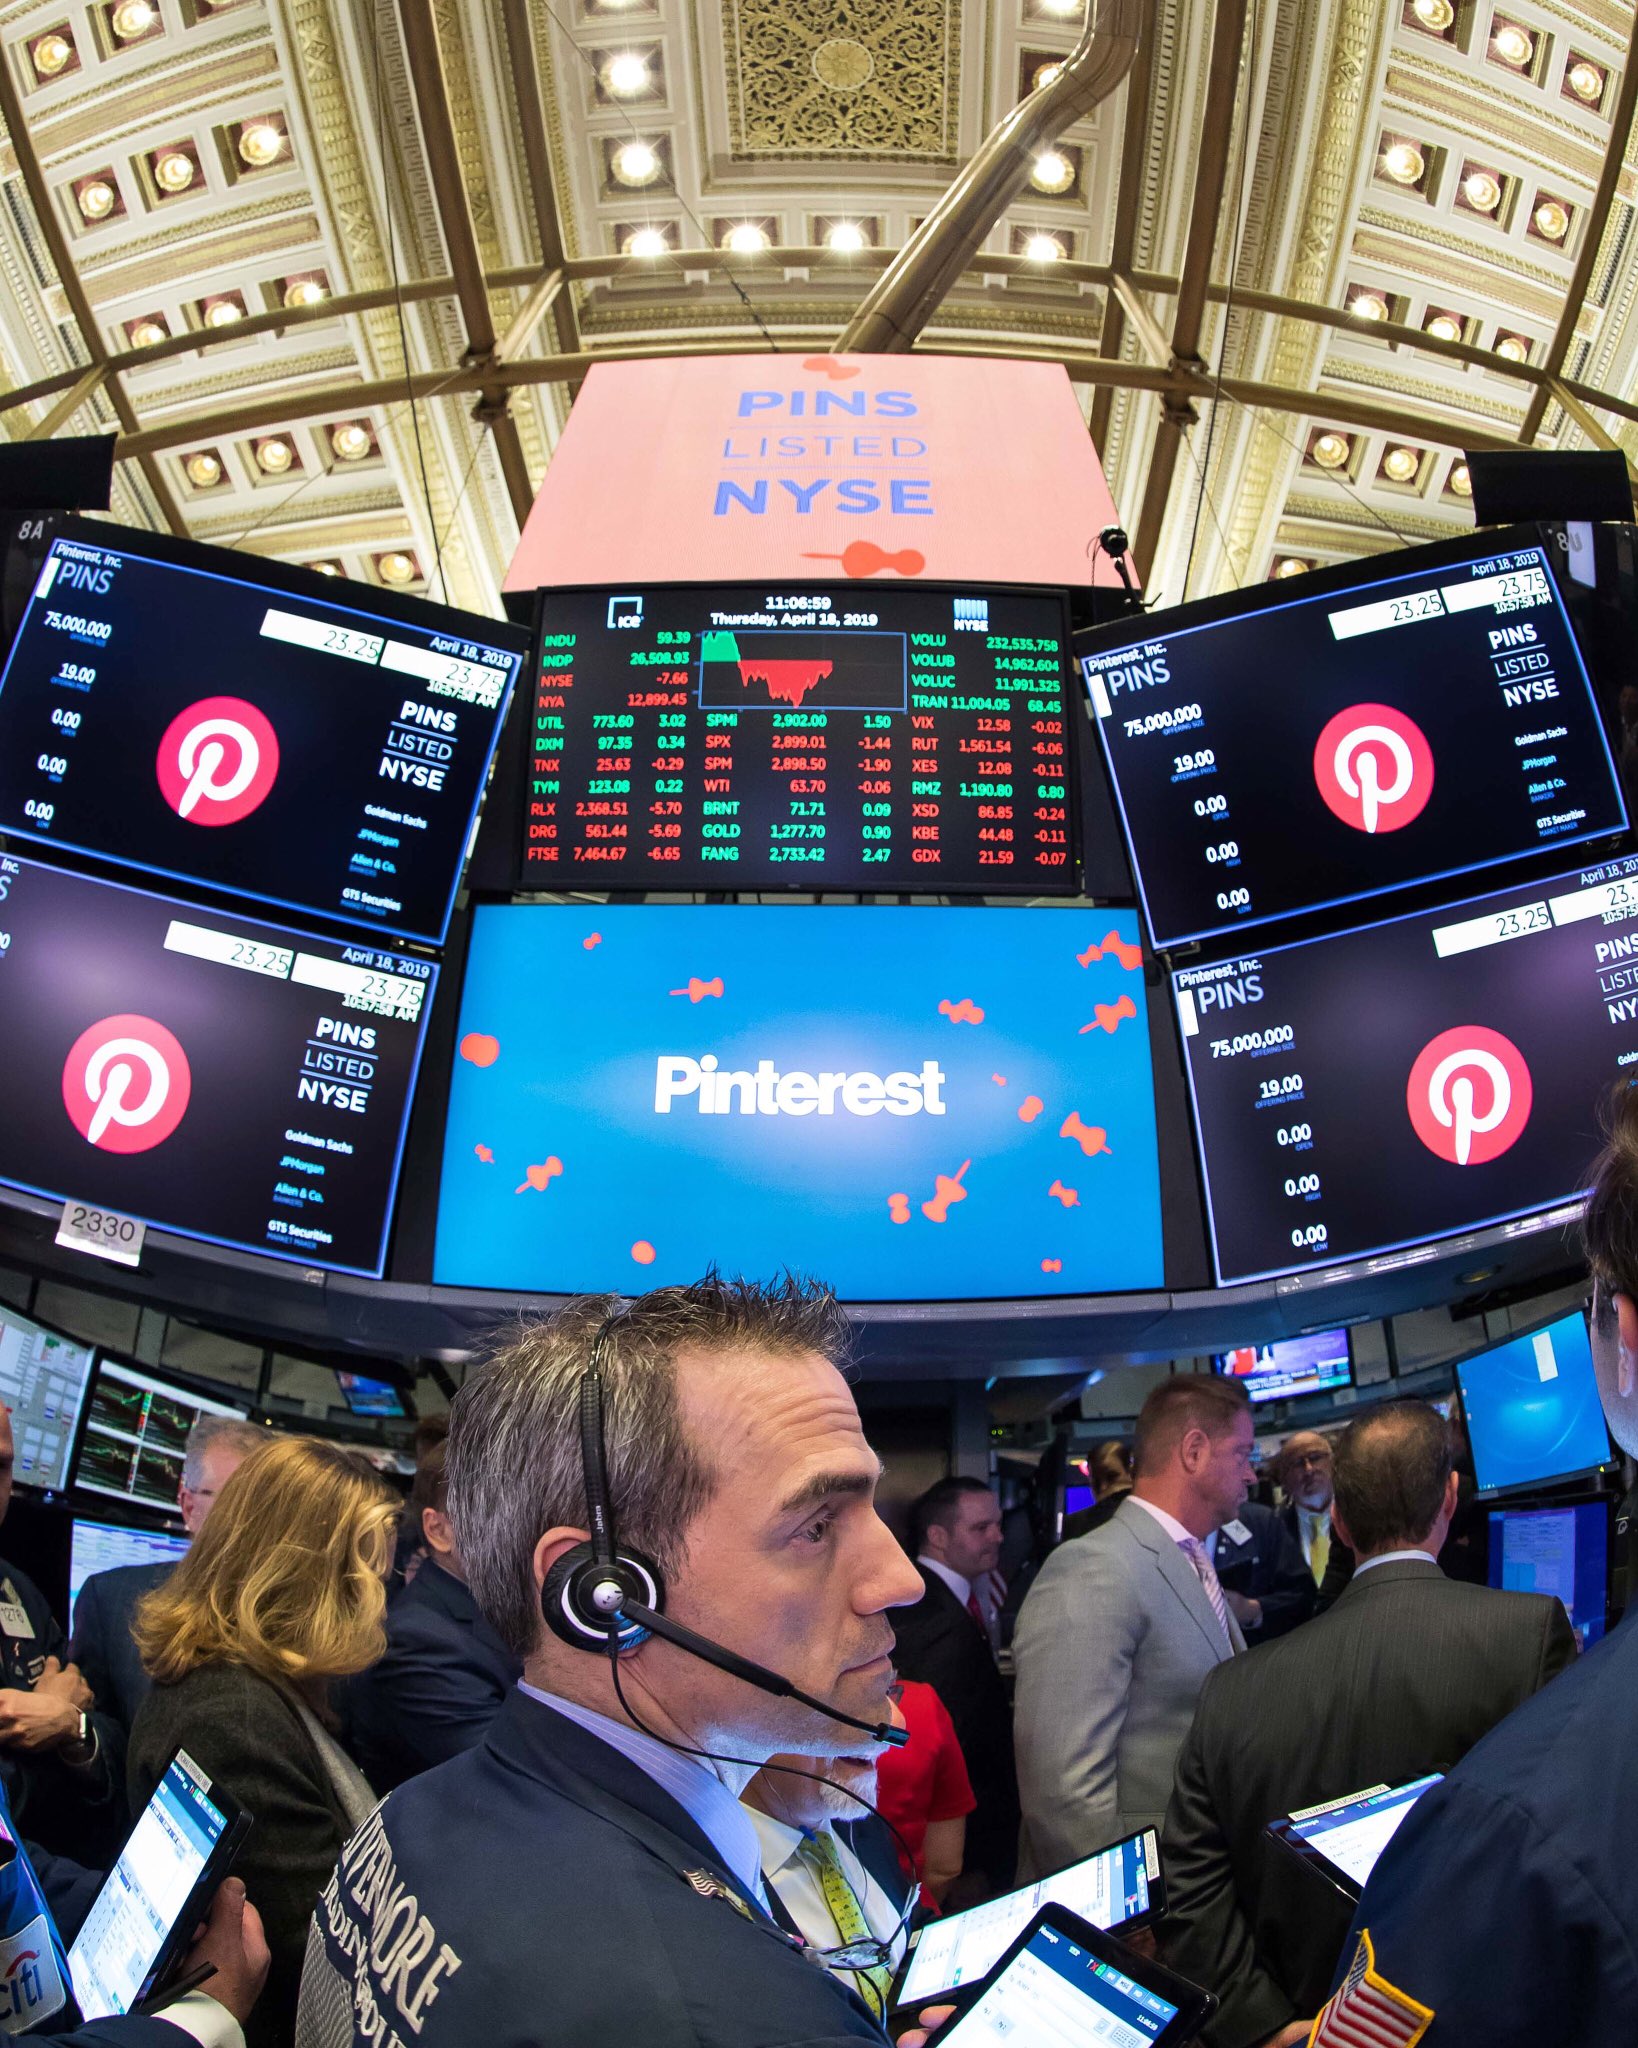 NYSE 🏛 on X: Currently pinning on @Pinterest: Original NYSE